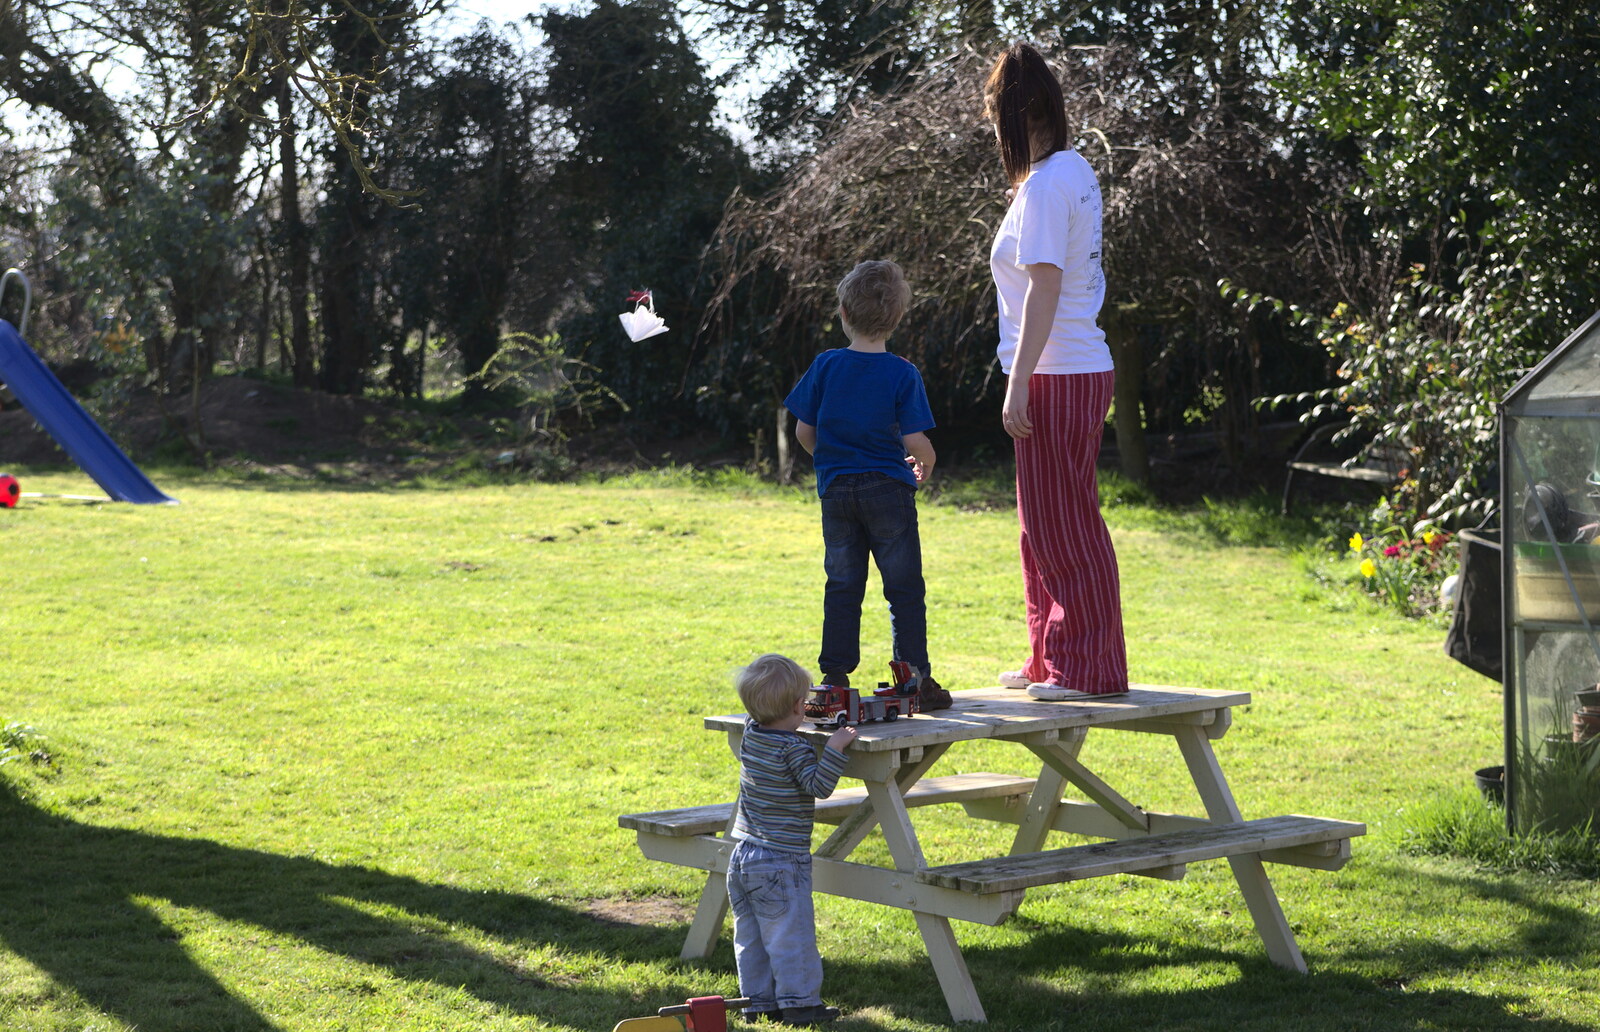 Fred hurls his parachute around from Emily Comes to Visit, Brome, Suffolk - 15th March 2014